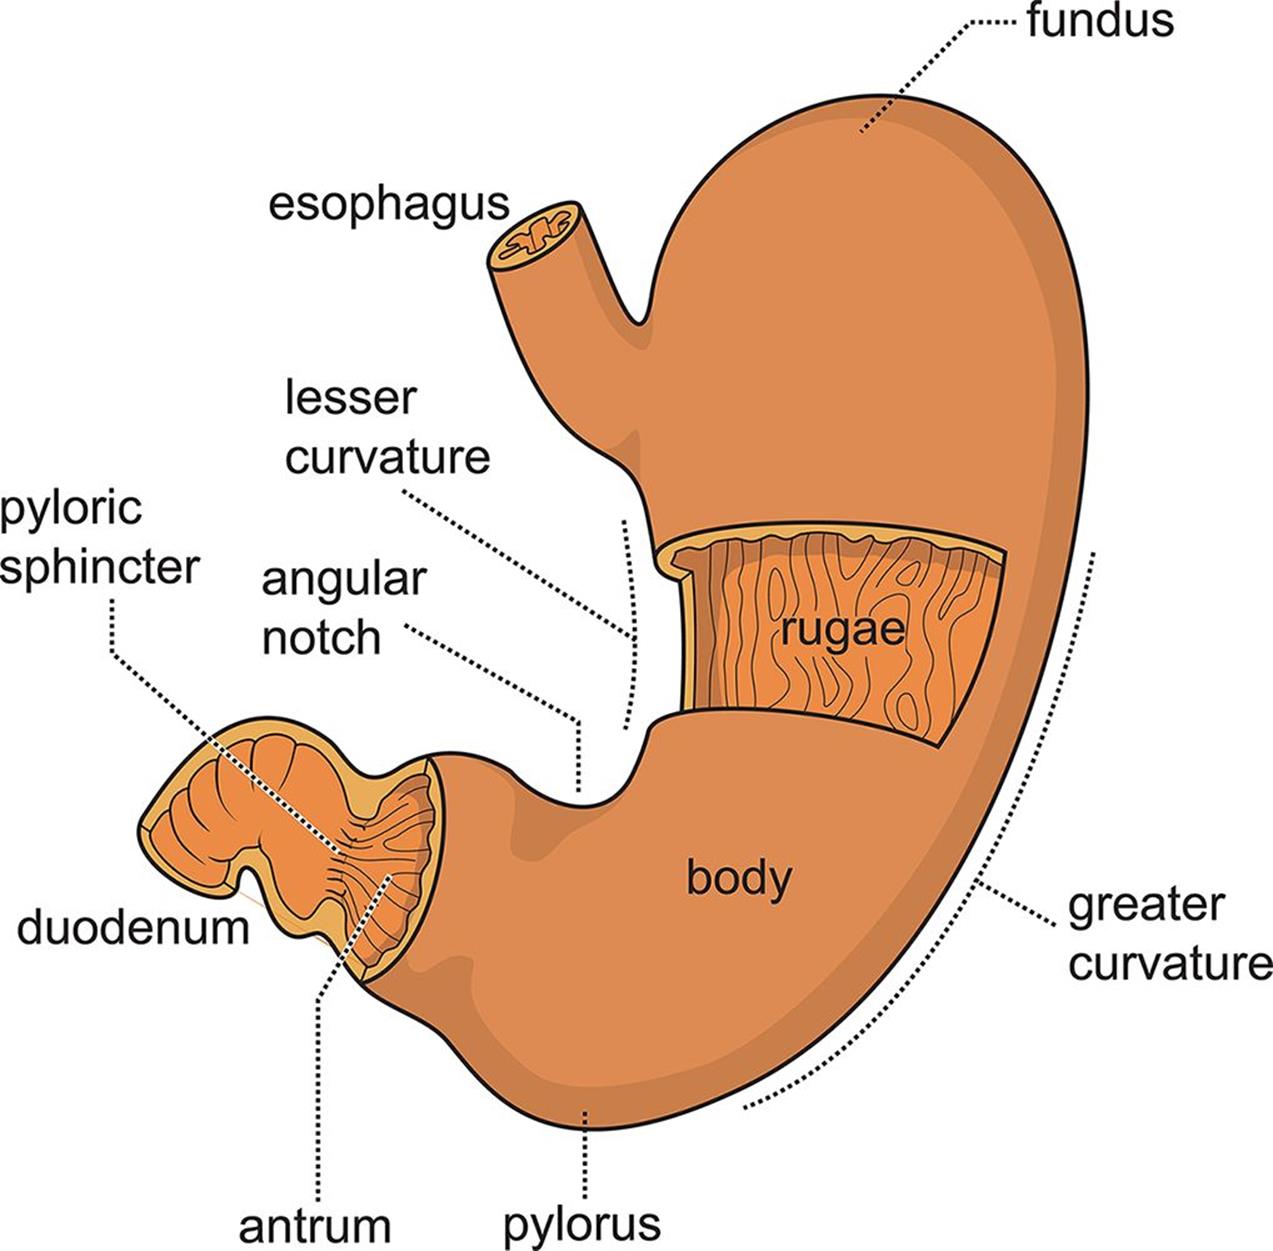 Figure 9.2. Anatomy of the Stomach